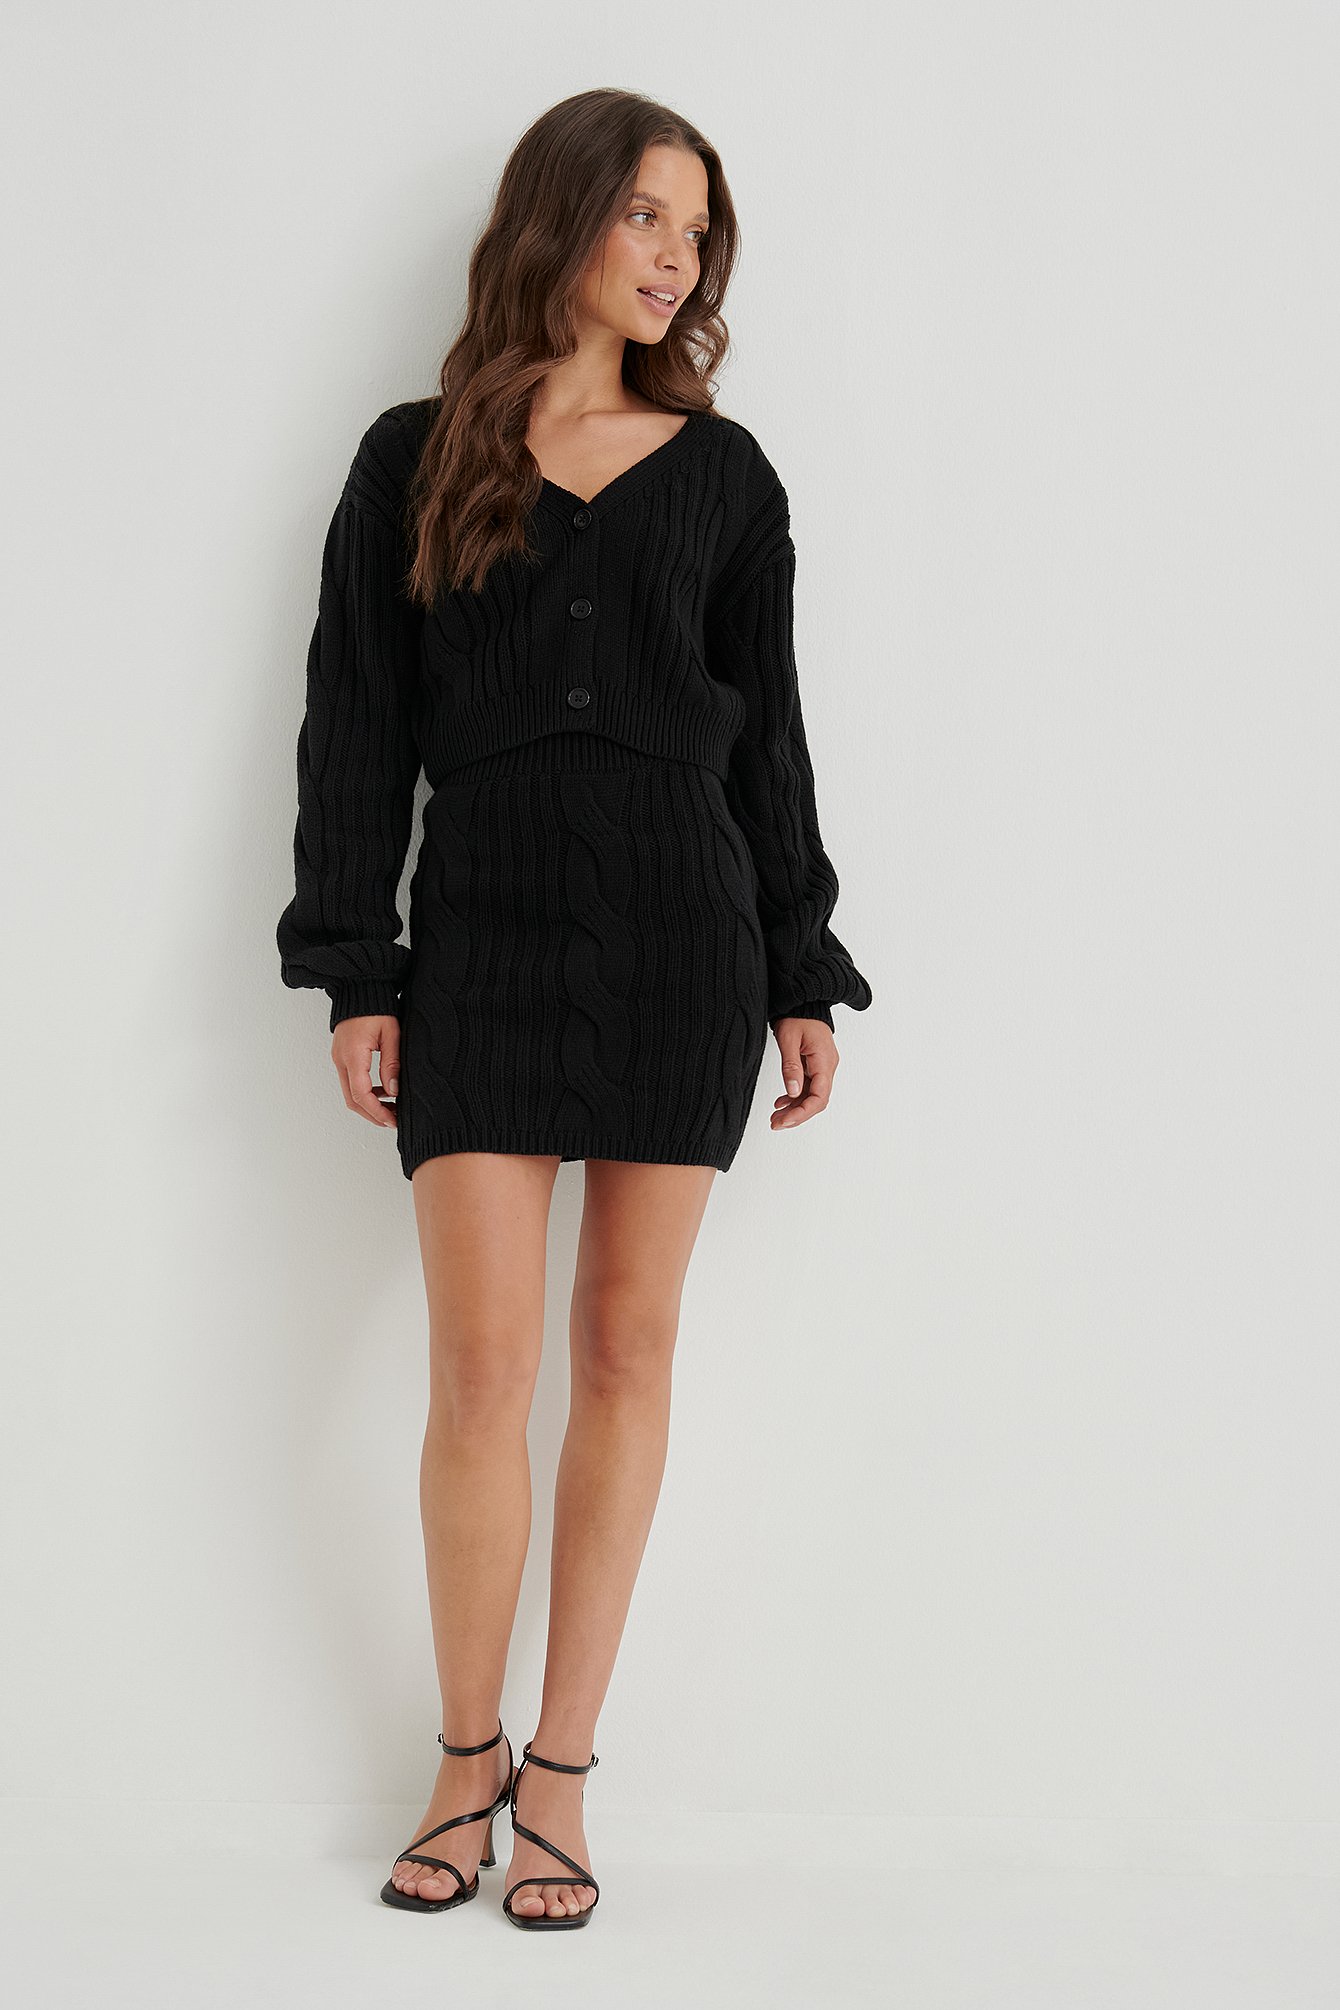 Black Cable Knit Skirt